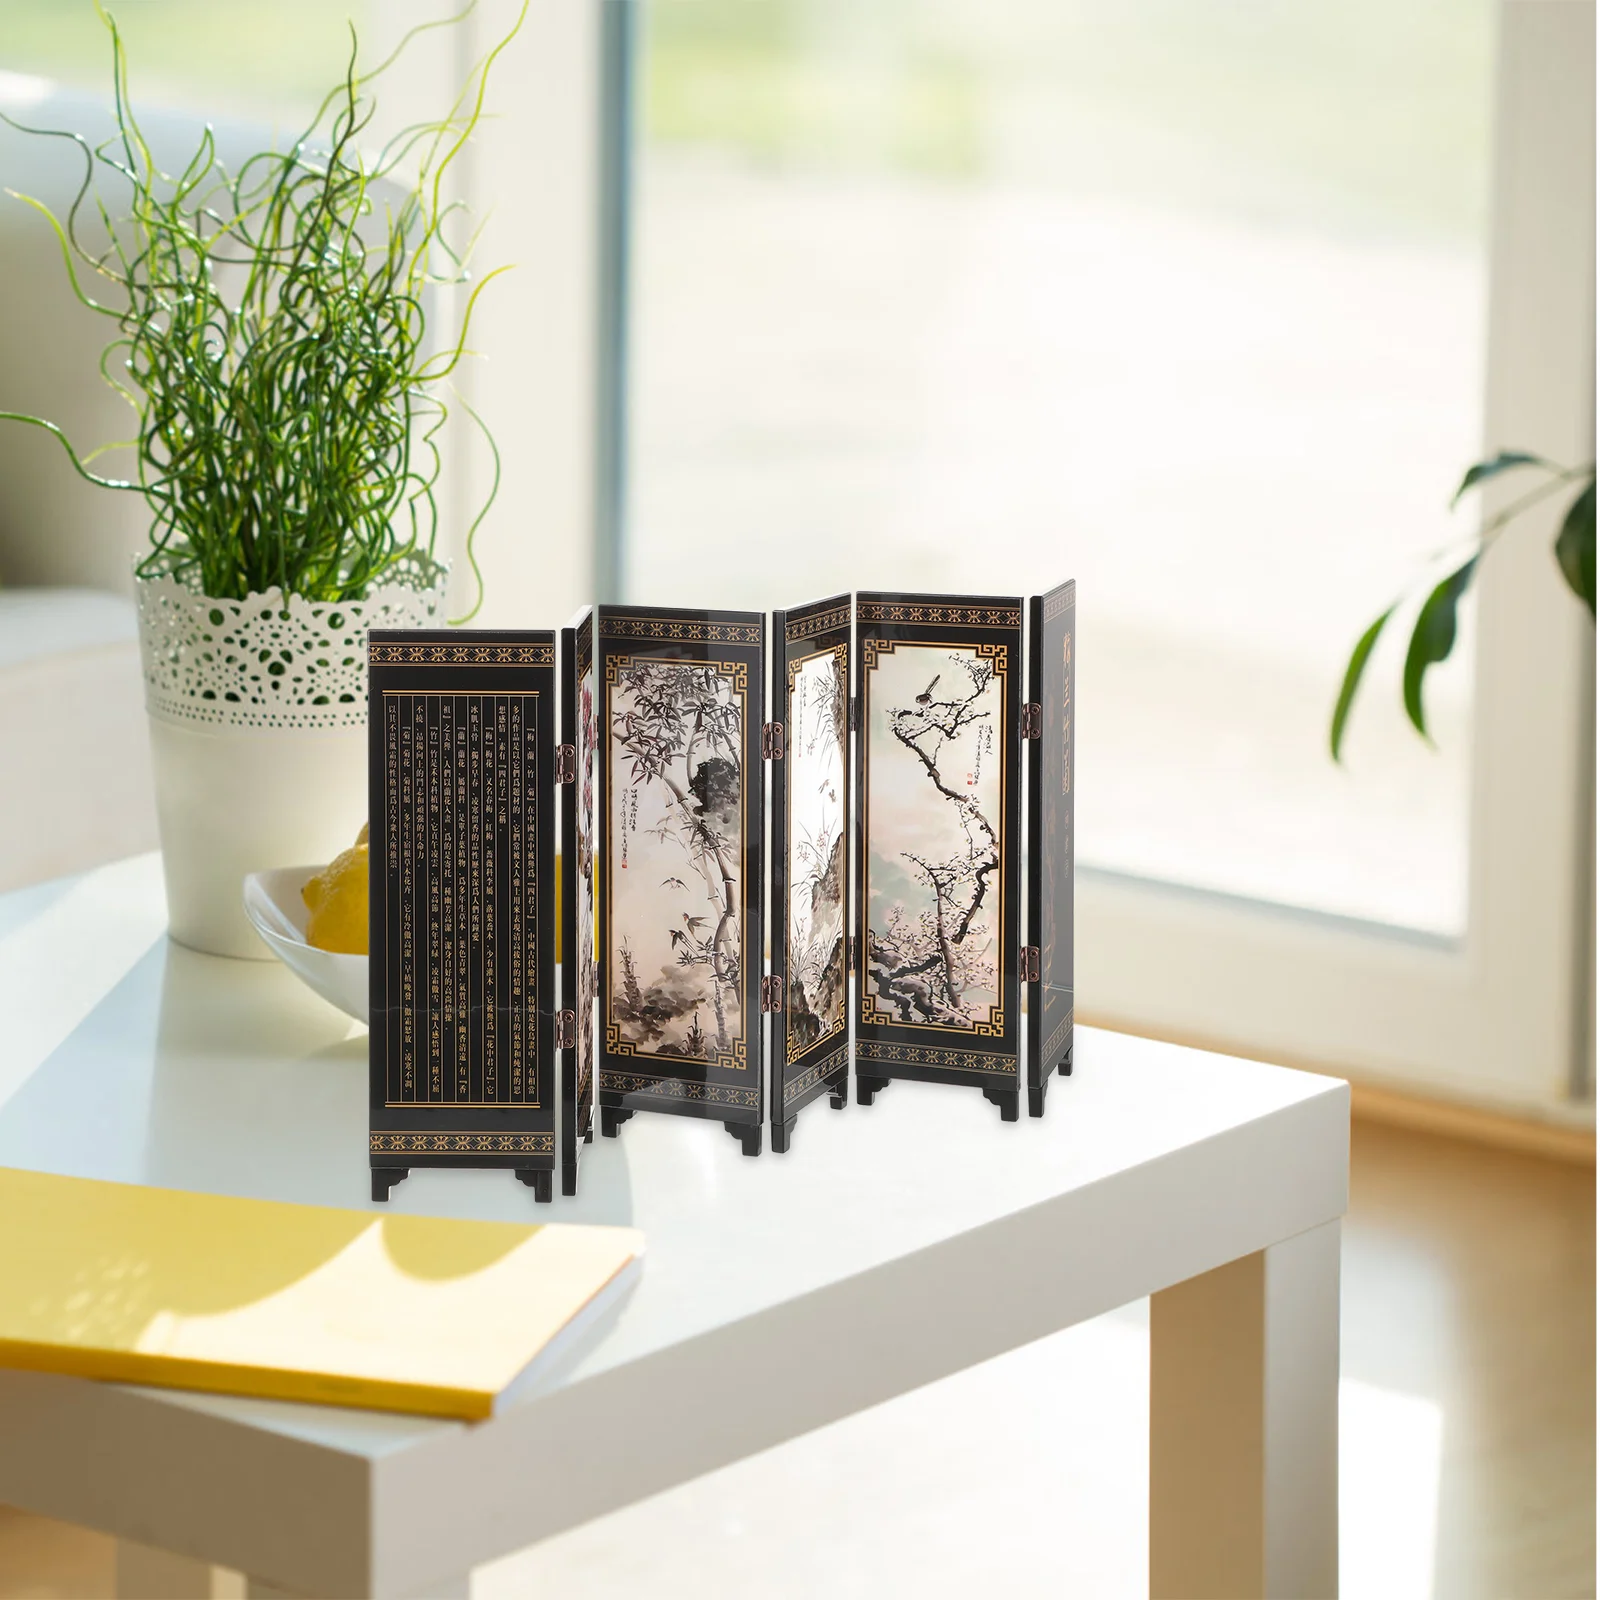 

Mini Screen Antique Folding Screen Wall Divider Decor Chinese Style Home Living Room Study Table Wall Divider Decoration